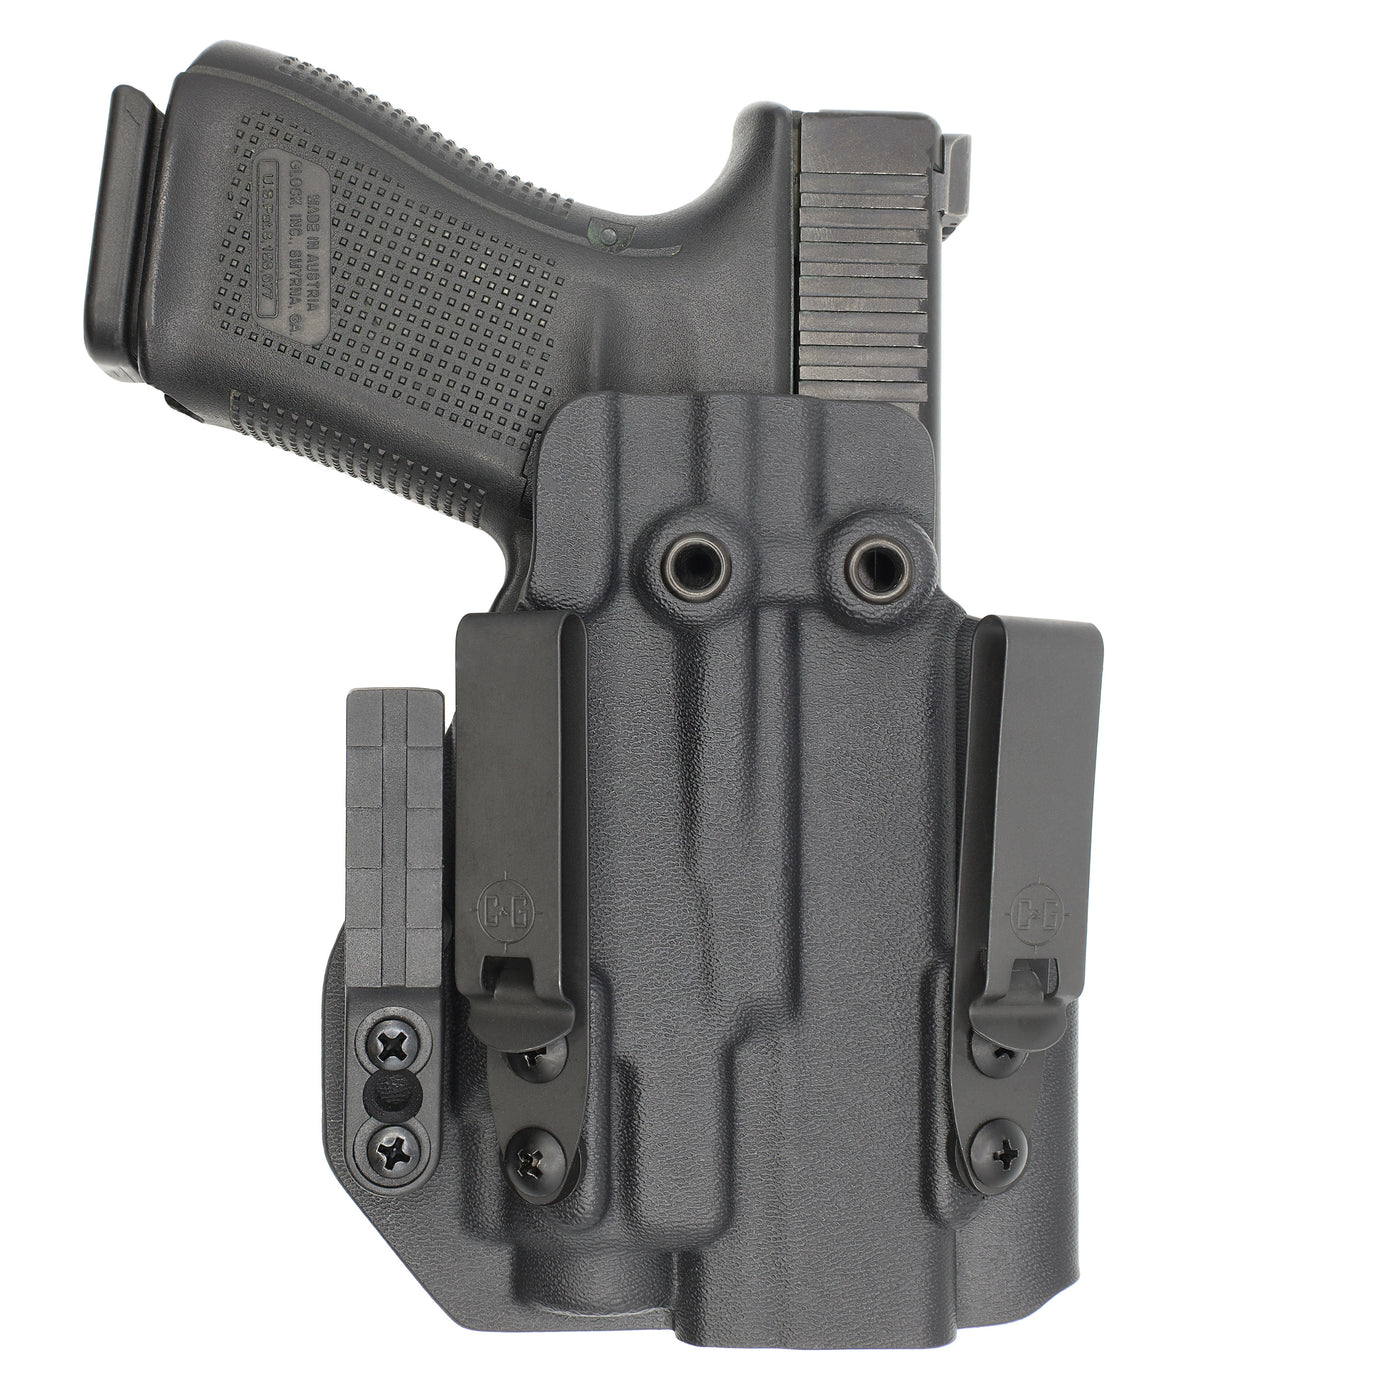 C&G Holsters Custom IWB ALPHA UPGRADE Tactical Shadow Systems Streamlight TLR8 holstered